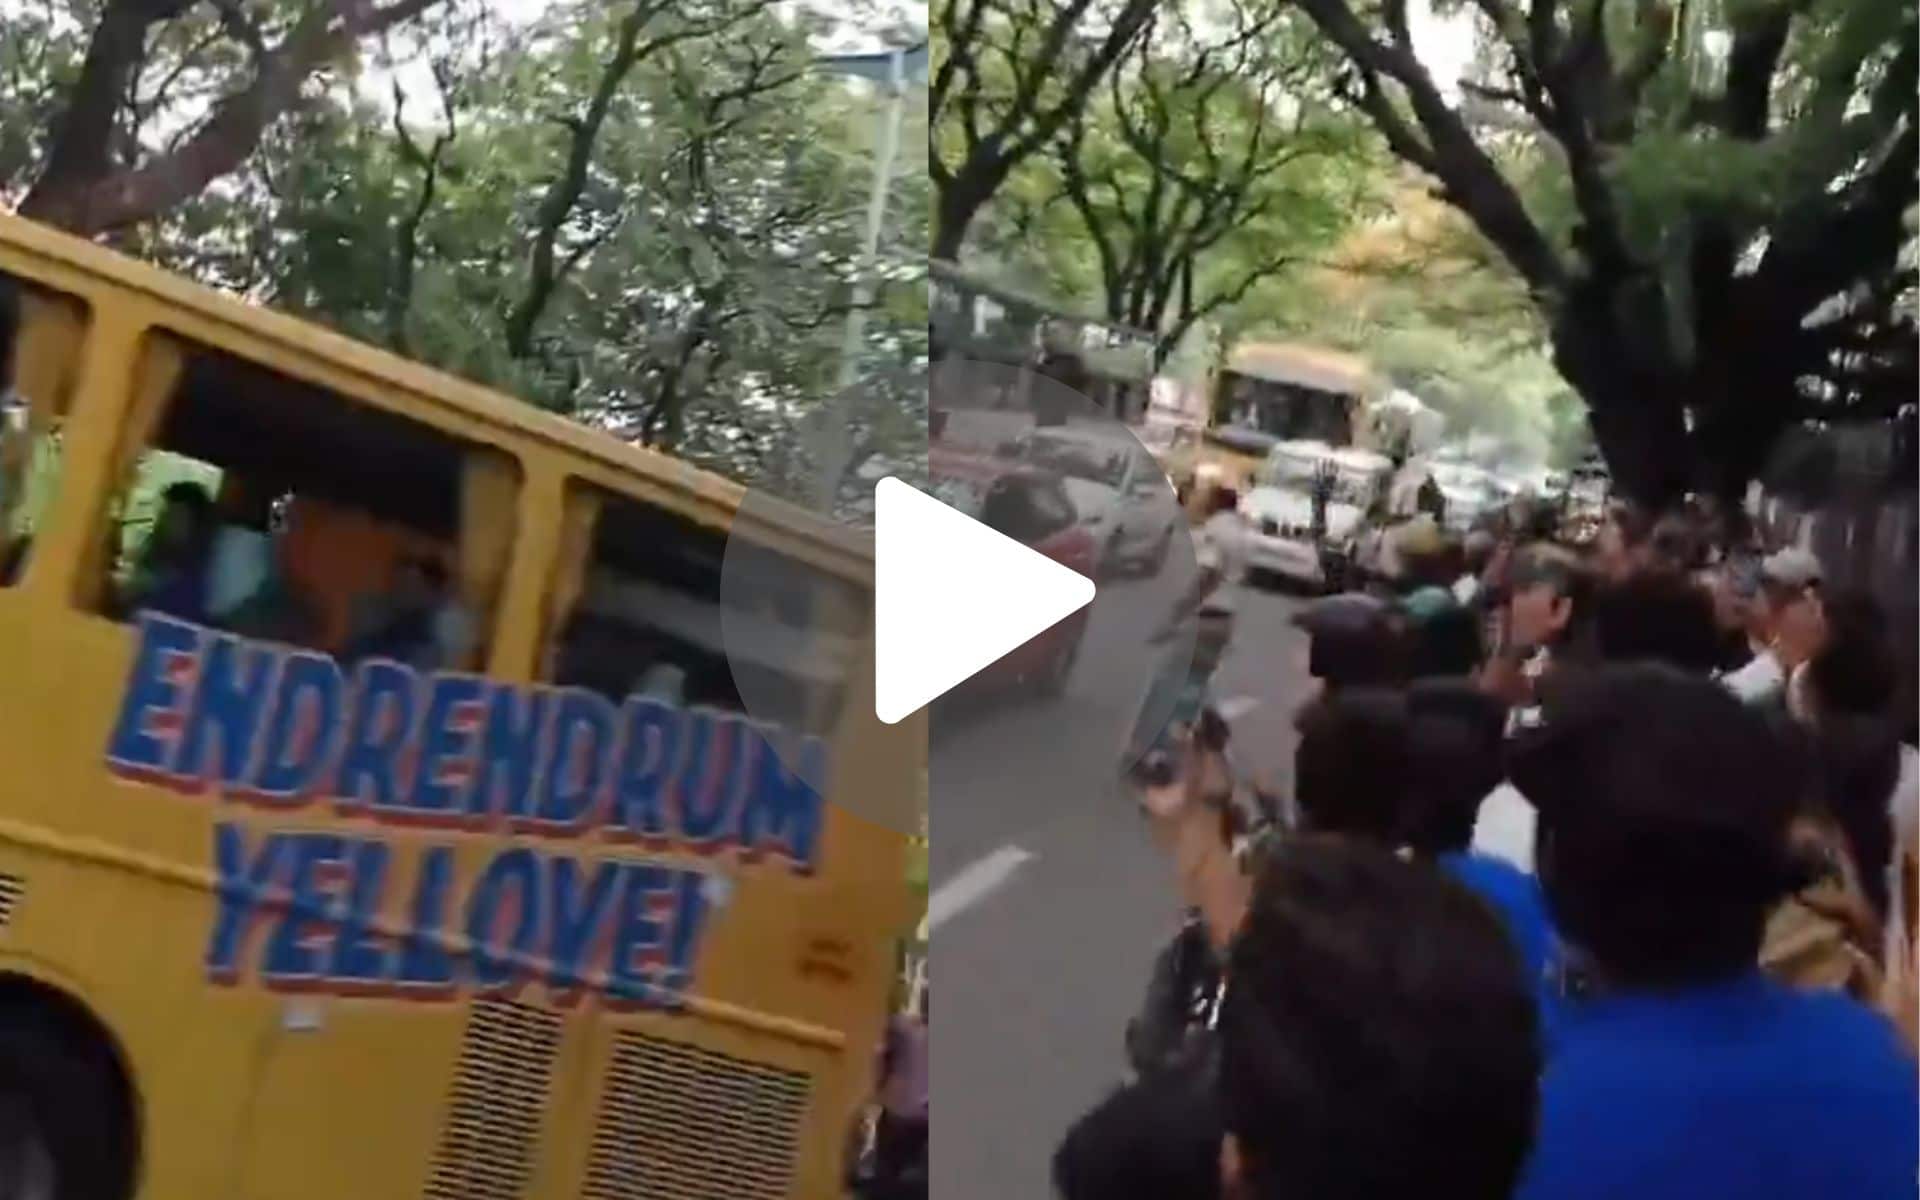 [Watch] Fans Go Berserk With Dhoni Chants On Bengaluru Streets Ahead Of RCB-CSK Match